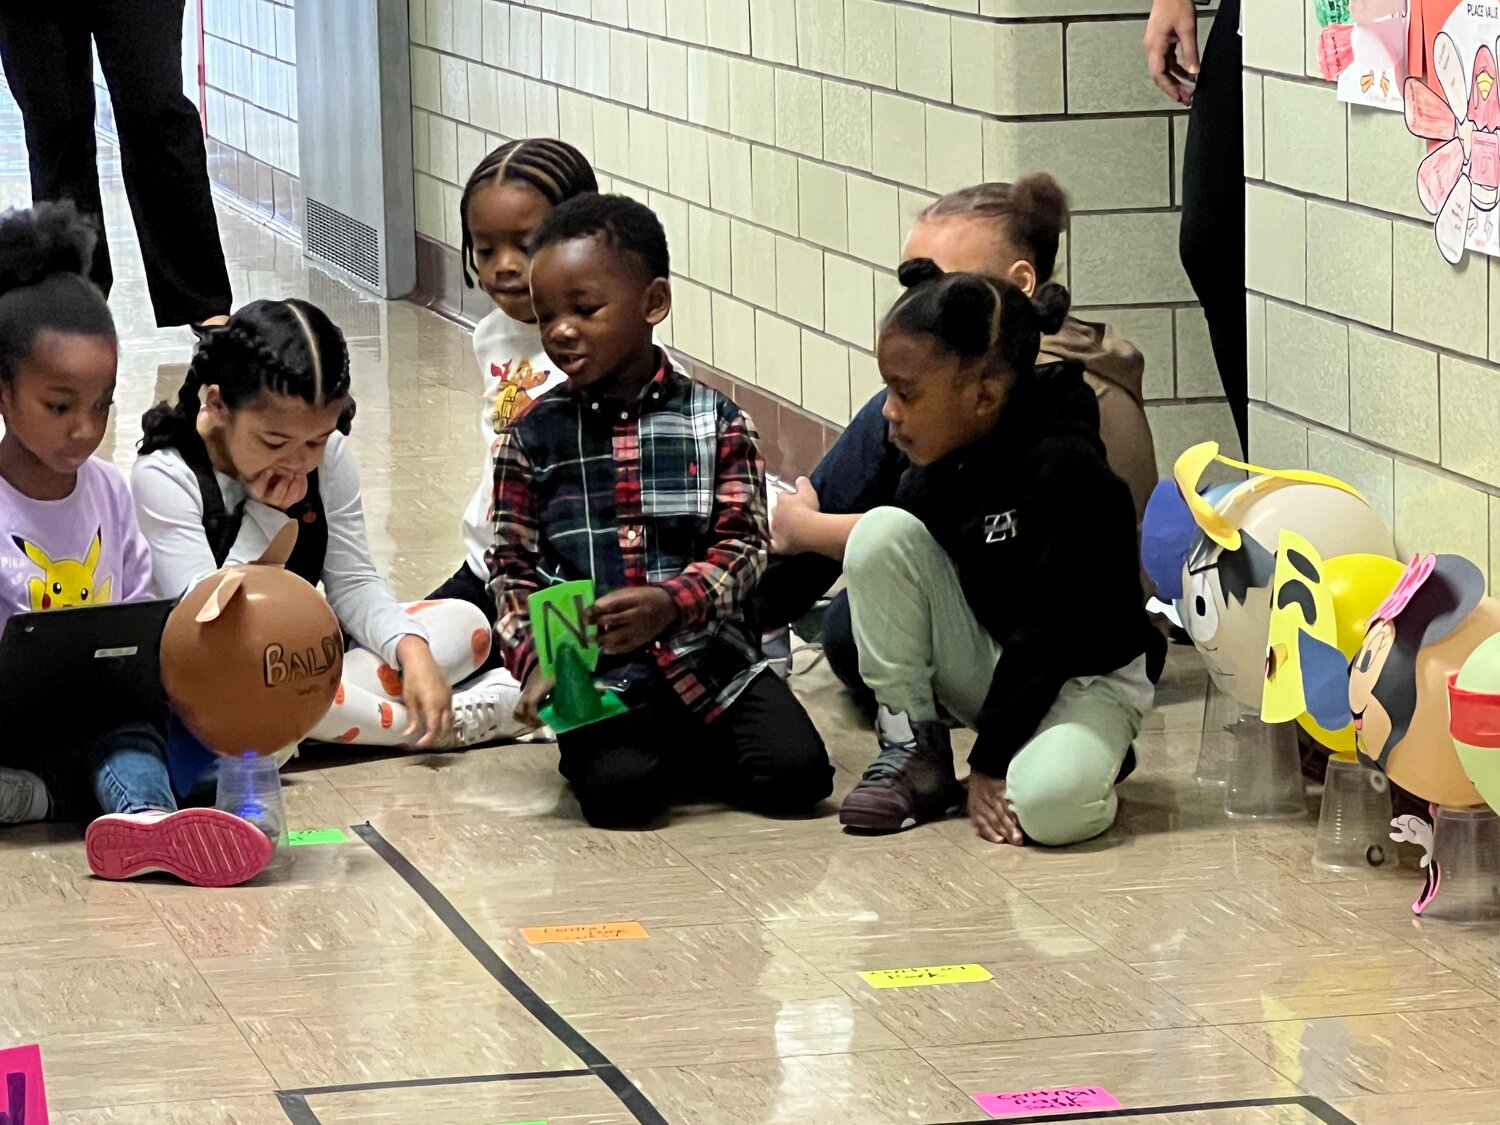 Brookside Elementary School students working to recreate the Macy’s Thanksgiving Day Parade. They used Spheros to move balloons they designed along a small version of the Manhattan parade route.